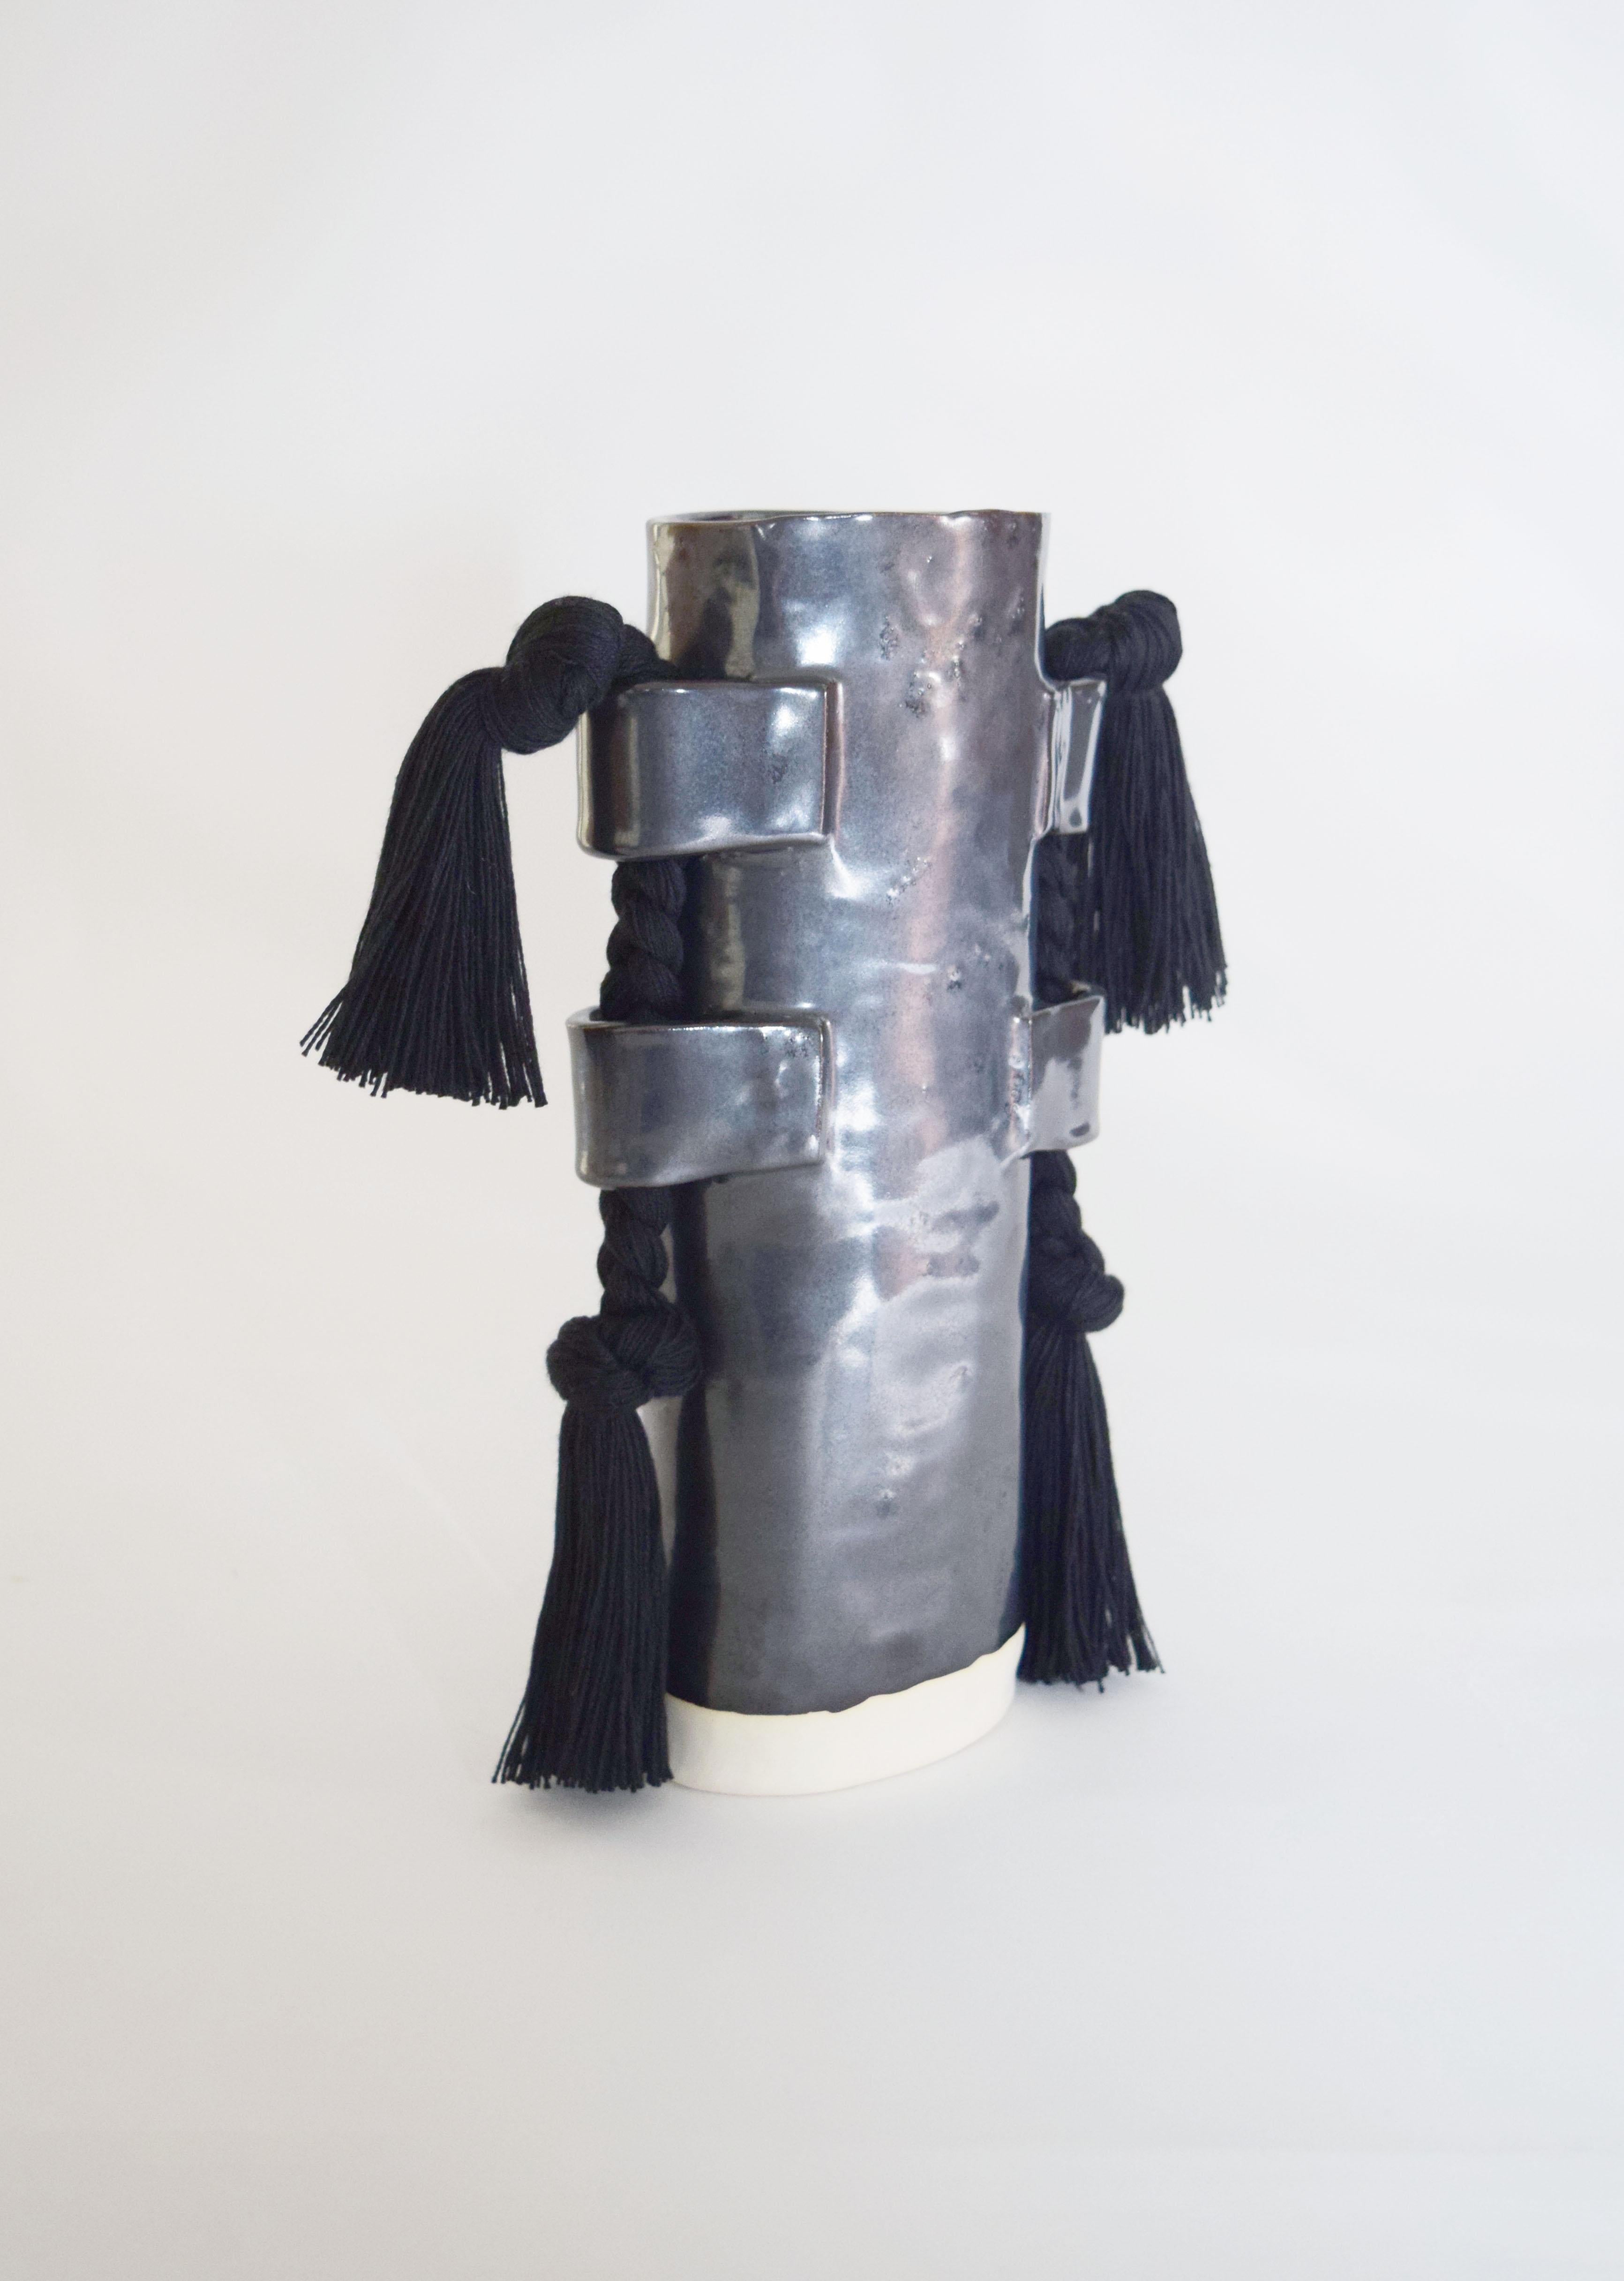 Vase #504 by Karen Gayle Tinney

Hand formed stoneware vase with black glaze. Inside is glazed black and will hold water, please take care not to damage fringe areas. Black cotton fringe braids with fringe are applied to the outside of the vase.